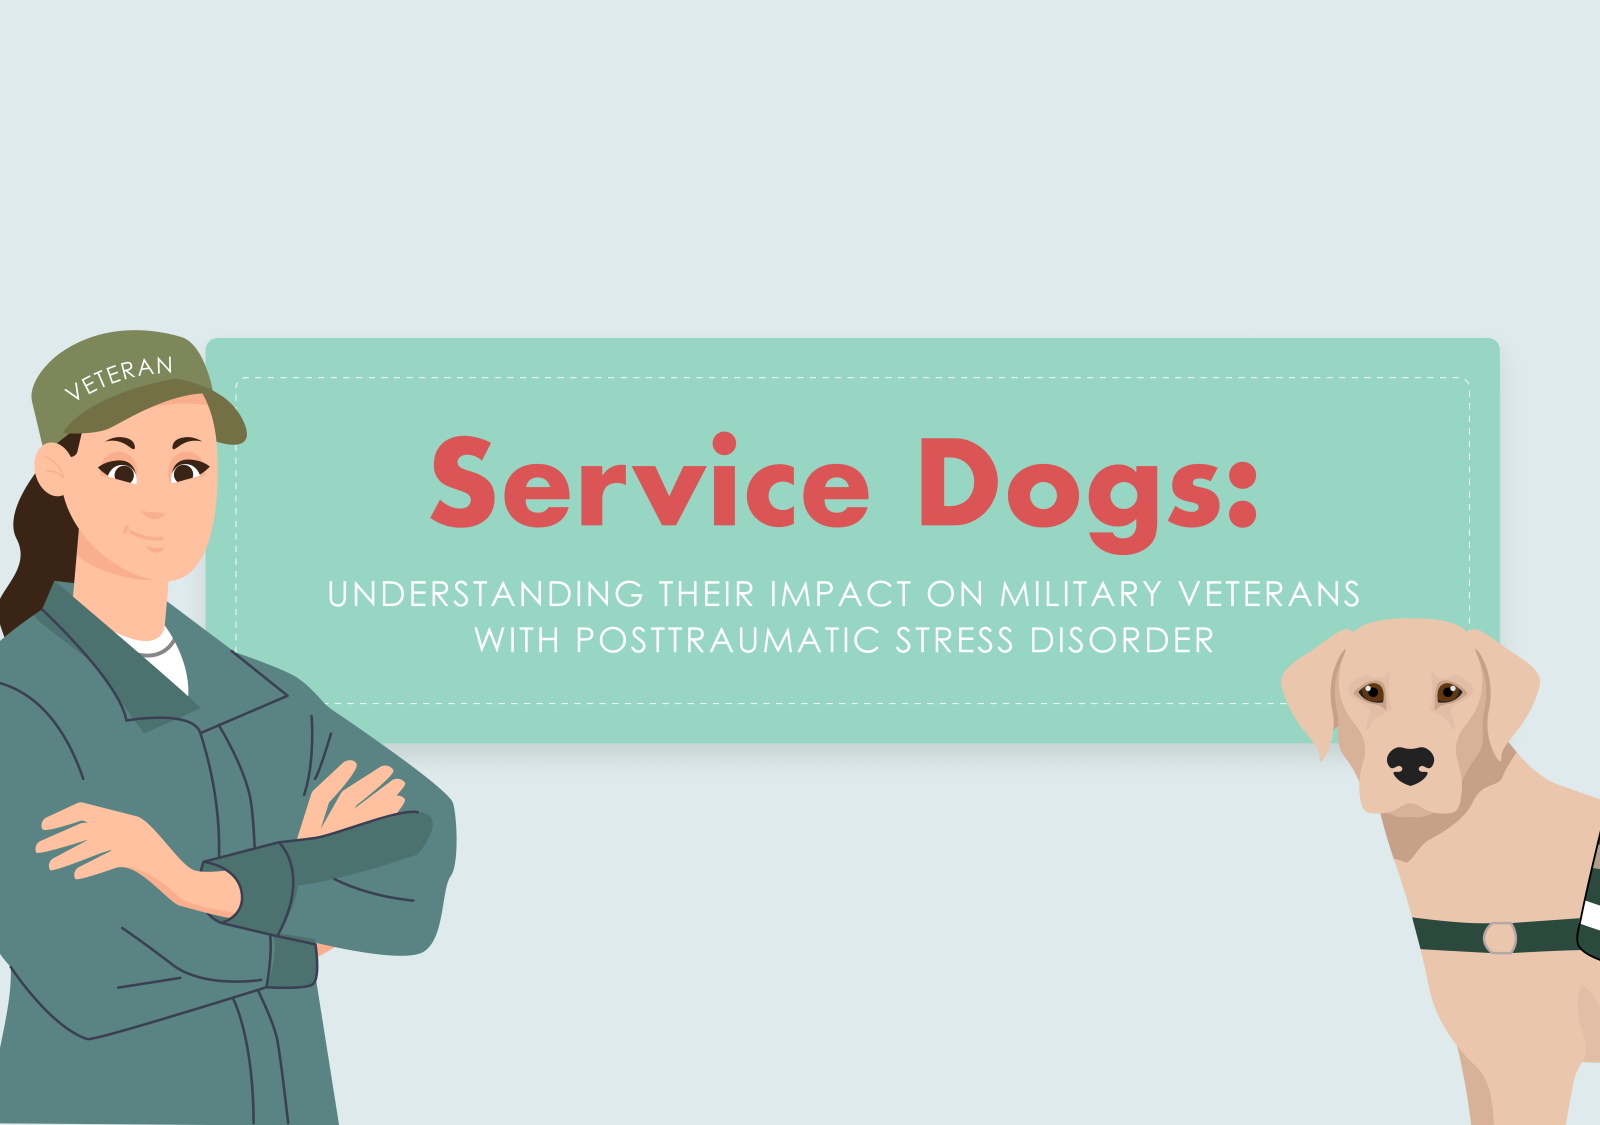 Dr Maggie O’Haire | Dr Kerri Rodriguez – Service Dogs: Understanding Their Impact on Military Veterans with Posttraumatic Stress Disorder